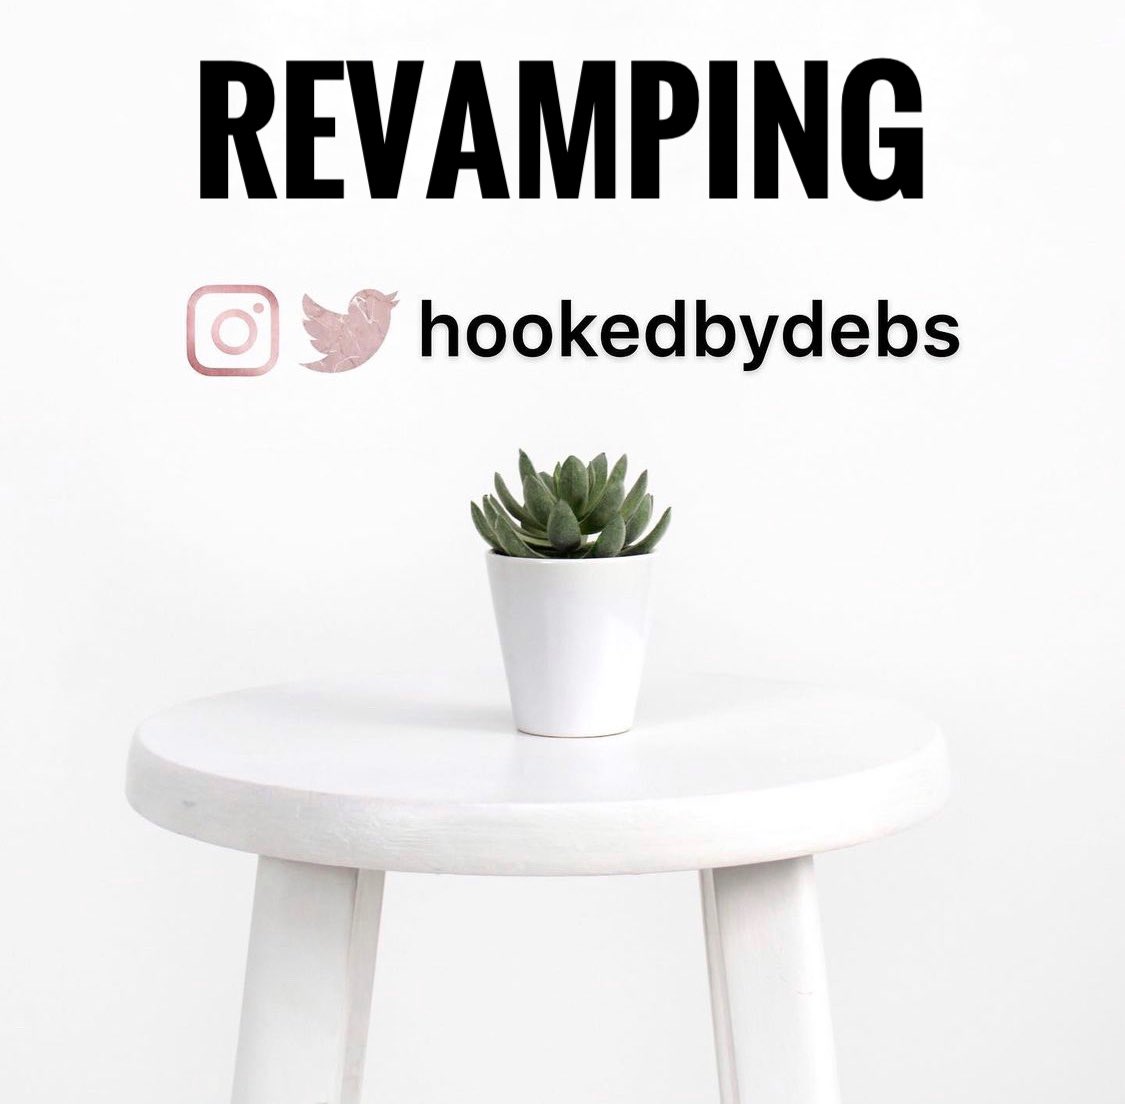 🚨 @hookedbydebs is under going a revamp & won’t be operational for awhile. I don’t see it all fully Lord but I’m excited for what is to come ☺️🙏🏾